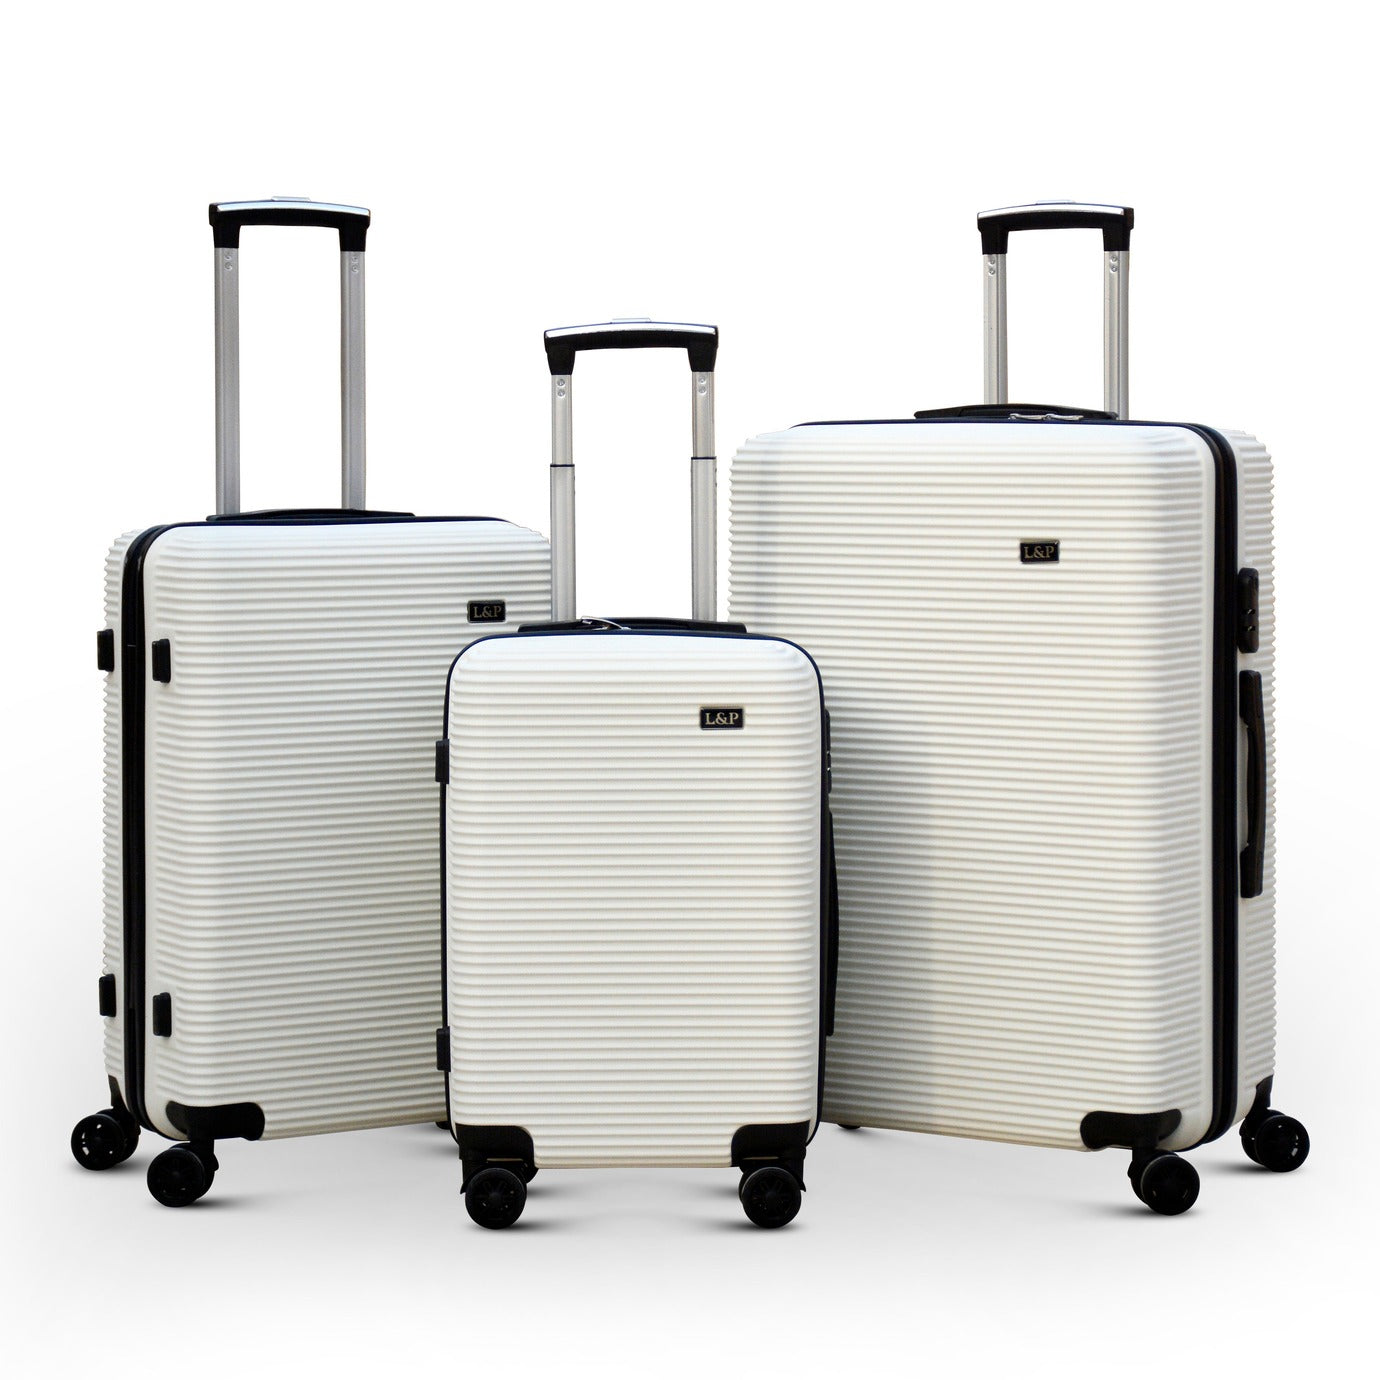 3 Piece Set 20" 24" 28 Inches White Colour JIAN ABS Line Luggage lightweight Hard Case Trolley Bag With Spinner Wheel Zaappy.com